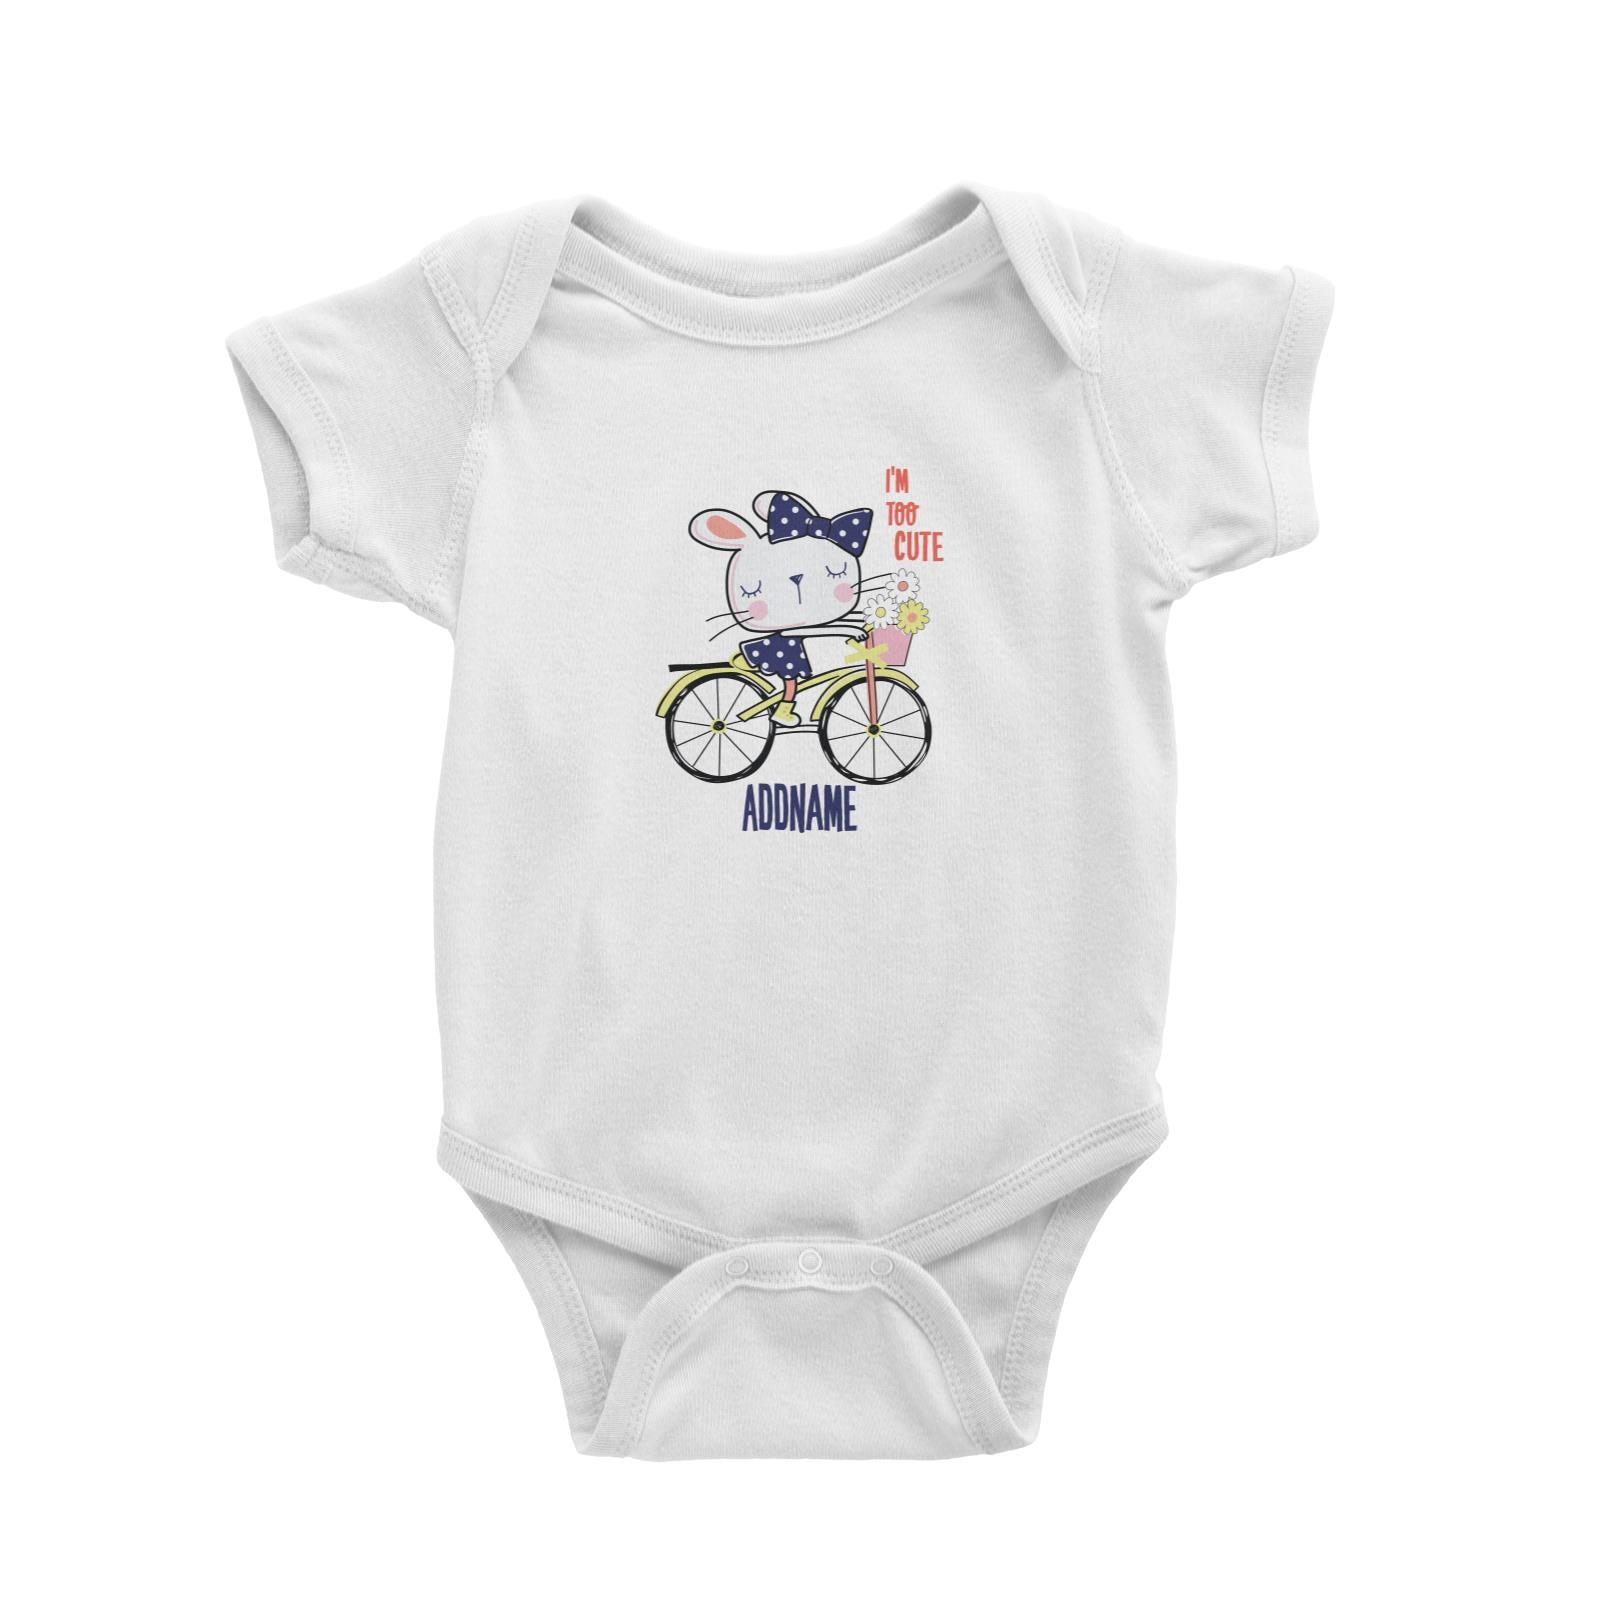 Cool Vibrant Series I'm Too Cute Bunny on Bicycle Addname Baby Romper [SALE]